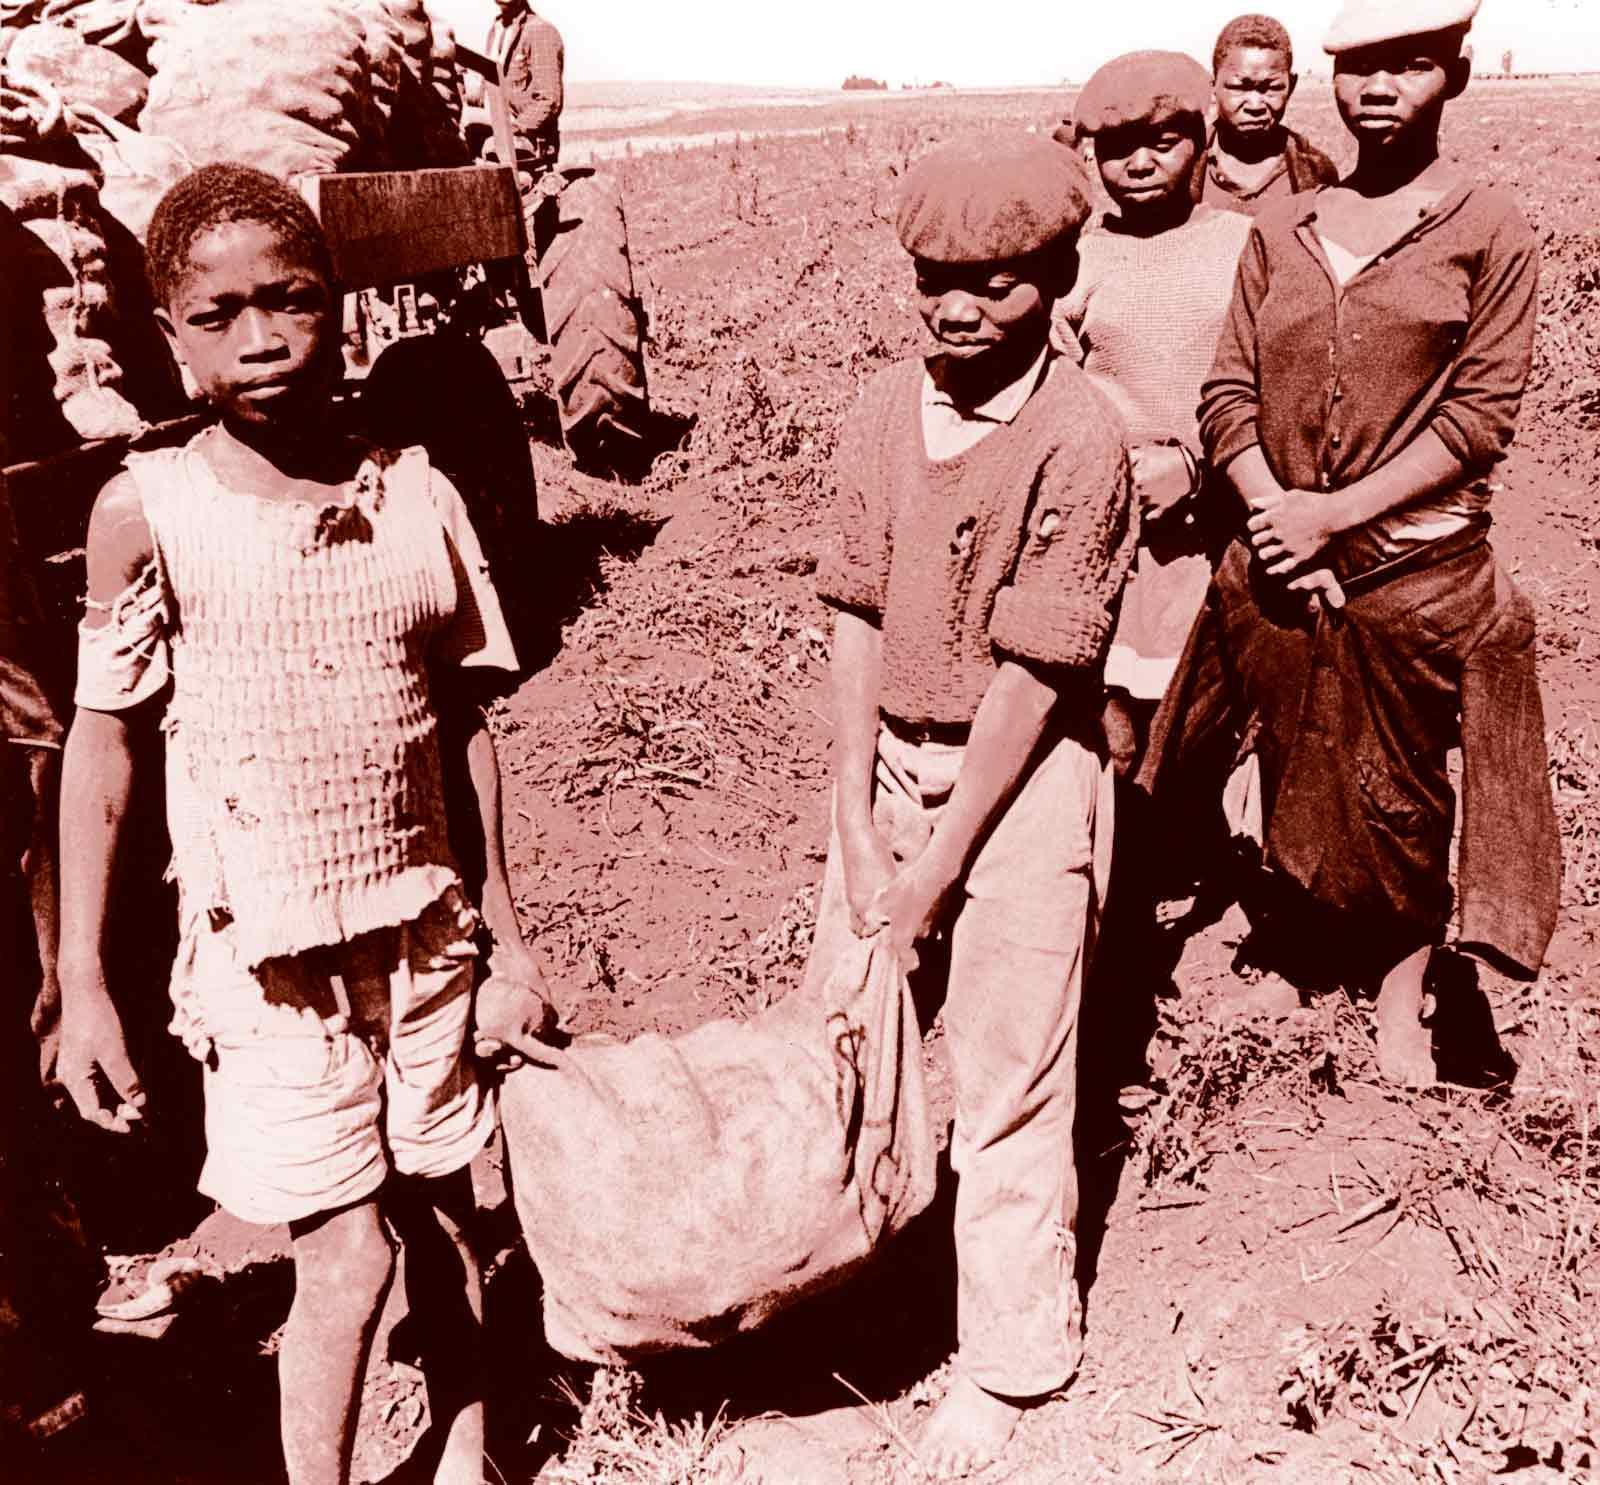 Child labourers in South Africa, 1970s